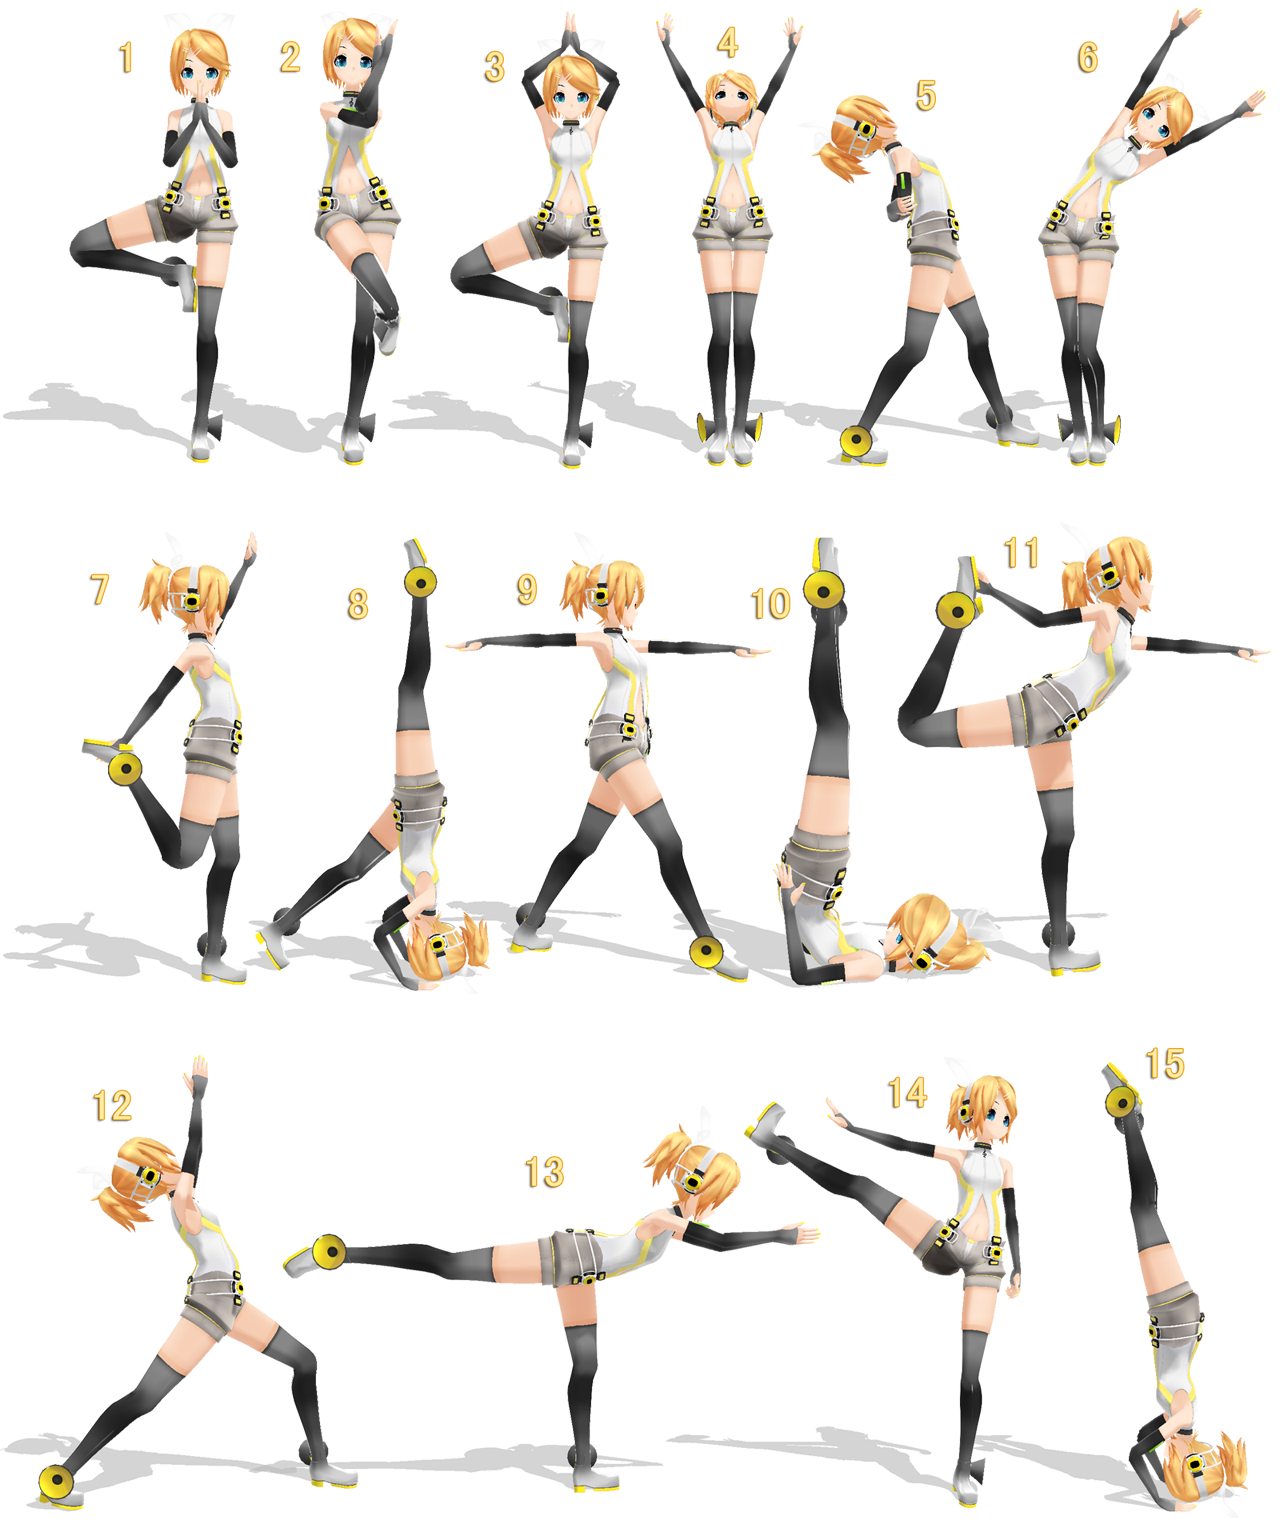 MMD] Yoga Pose Pack - DL by Snorlaxin on DeviantArt